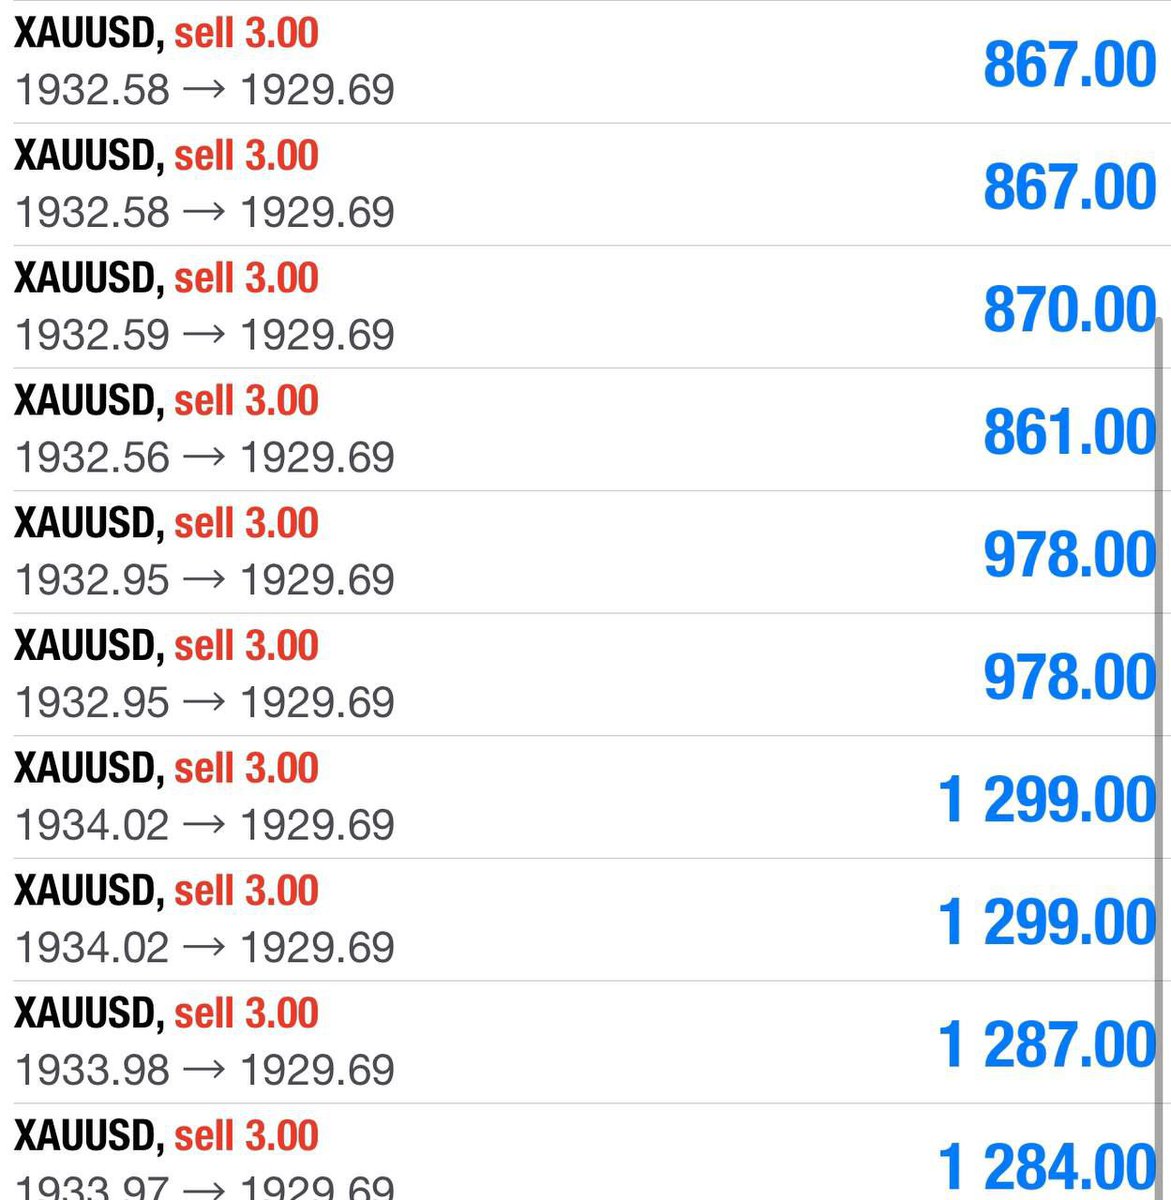 It's hard but you can do this let trade together
Free signal intraday and scalping

#motivationalquotes #motivation #bussiness #bussinessquotes #entrepreneur #luxurylifestyle #investing #marketing #savingmoney #savings #dedication #owner #bestofday #quotes